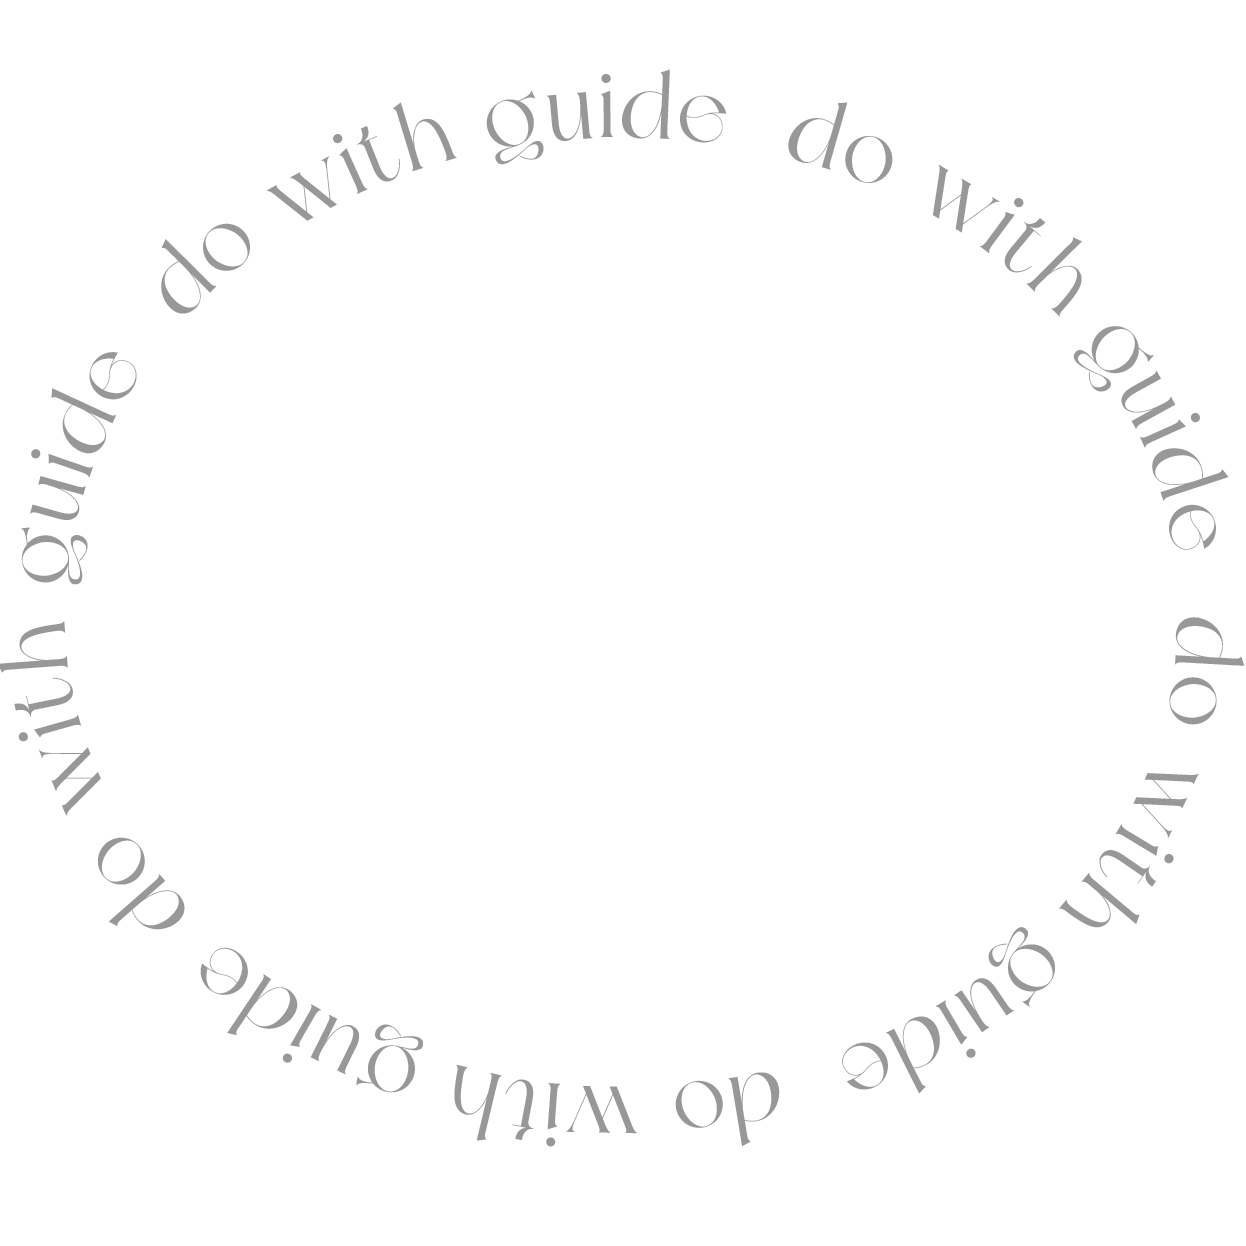 do with guide